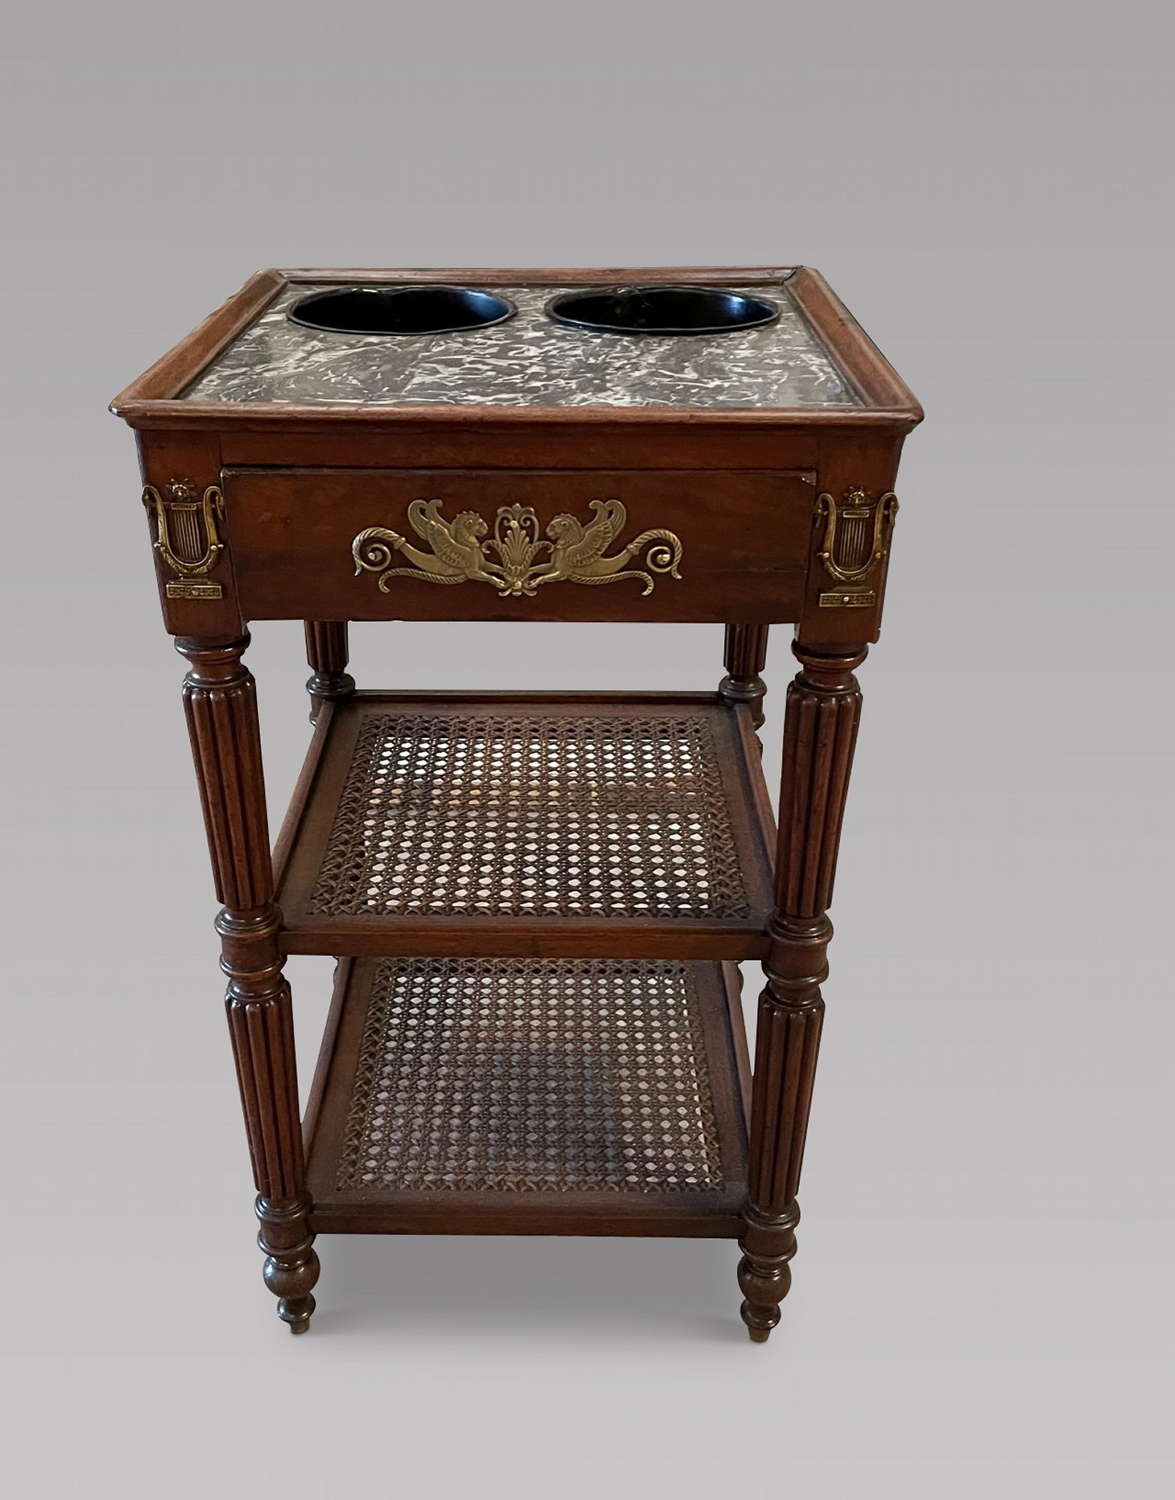 A 19th Century Champagne Table